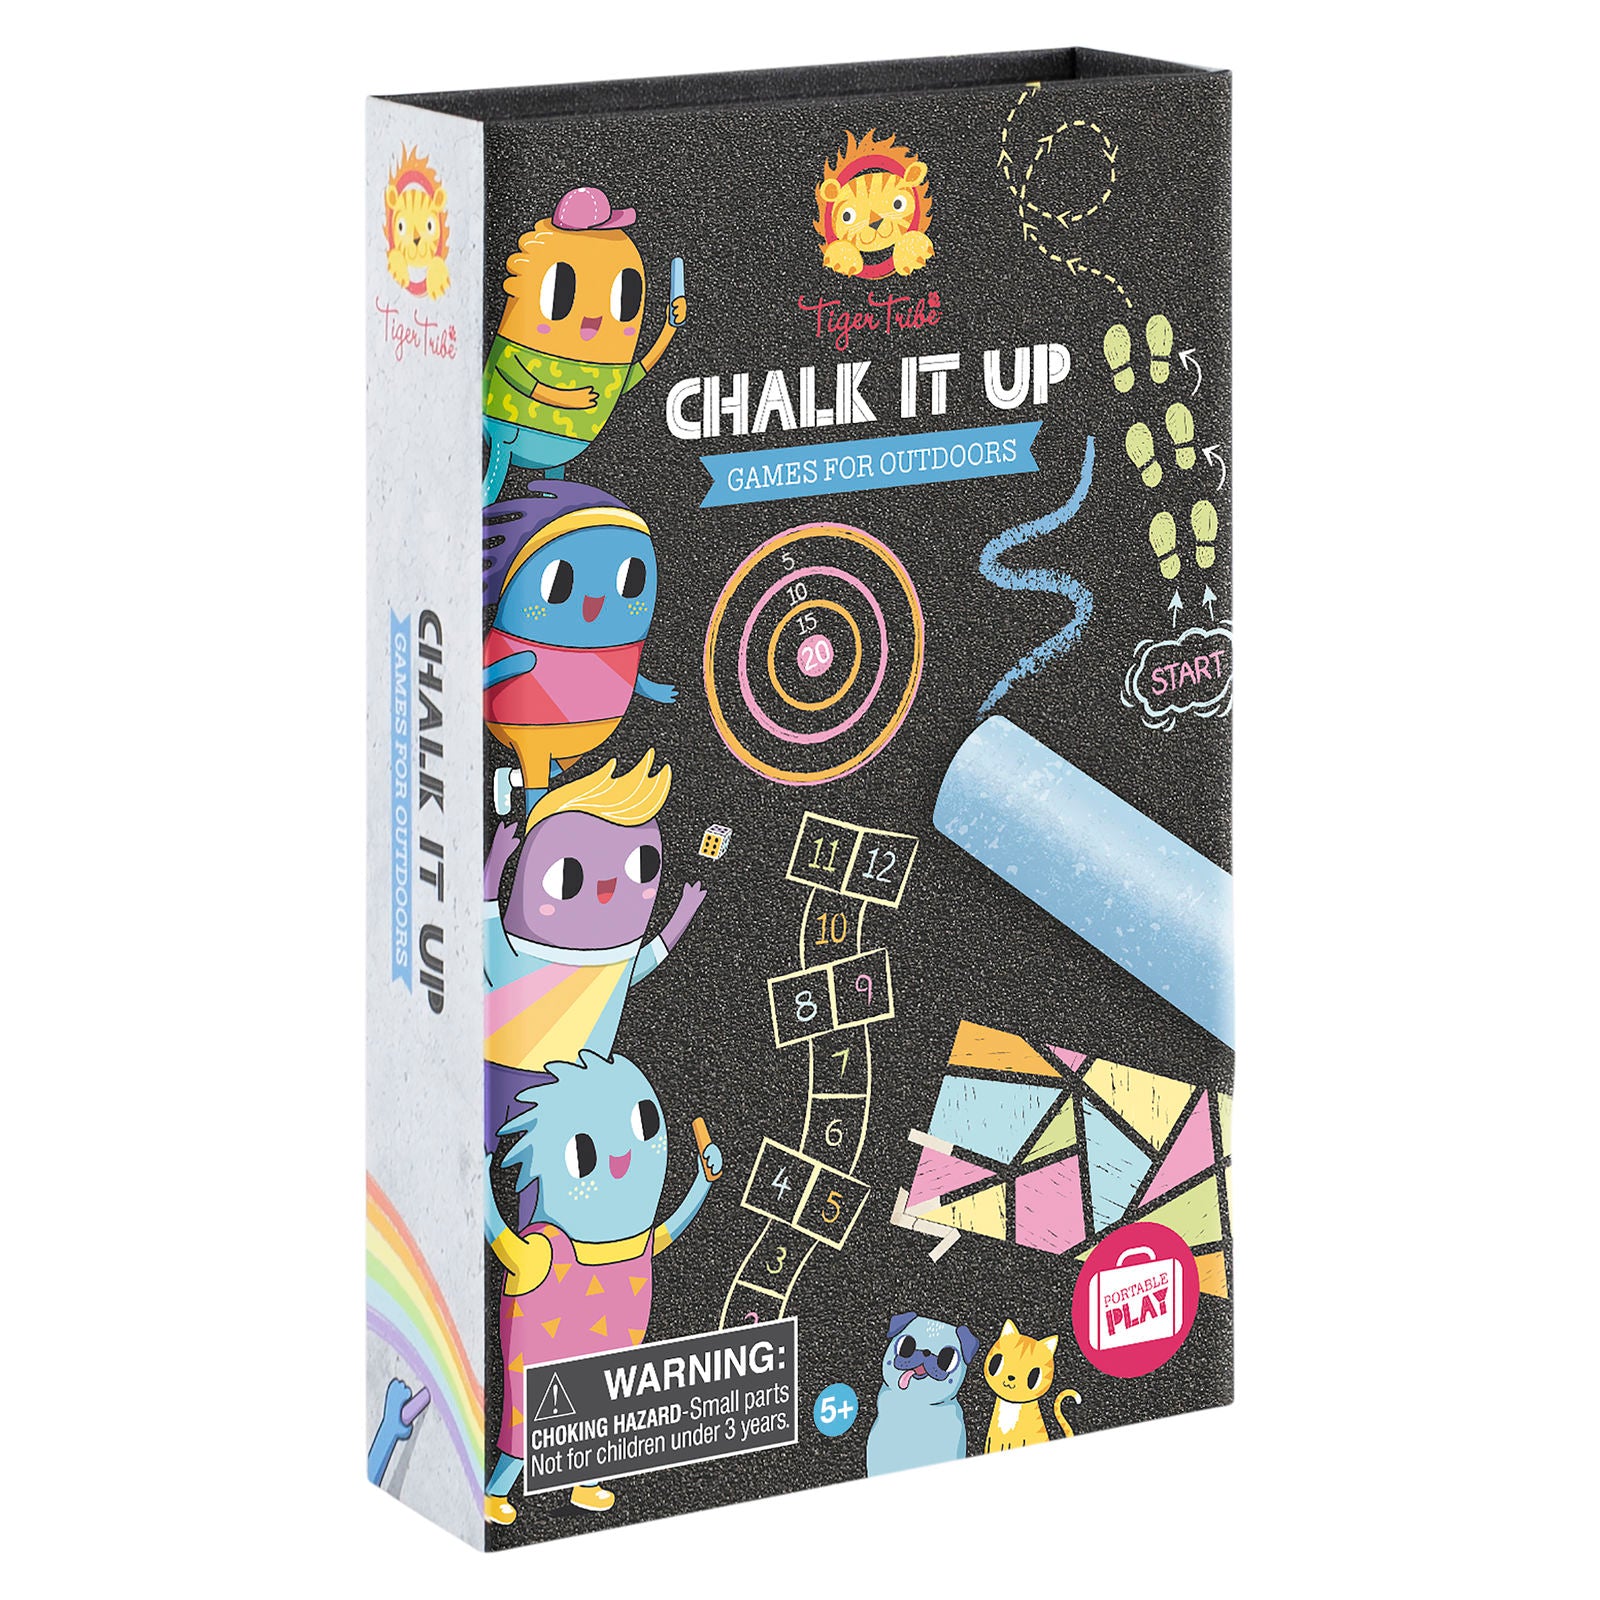 Tiger Tribe Games For Outdoors – Chalk It Up